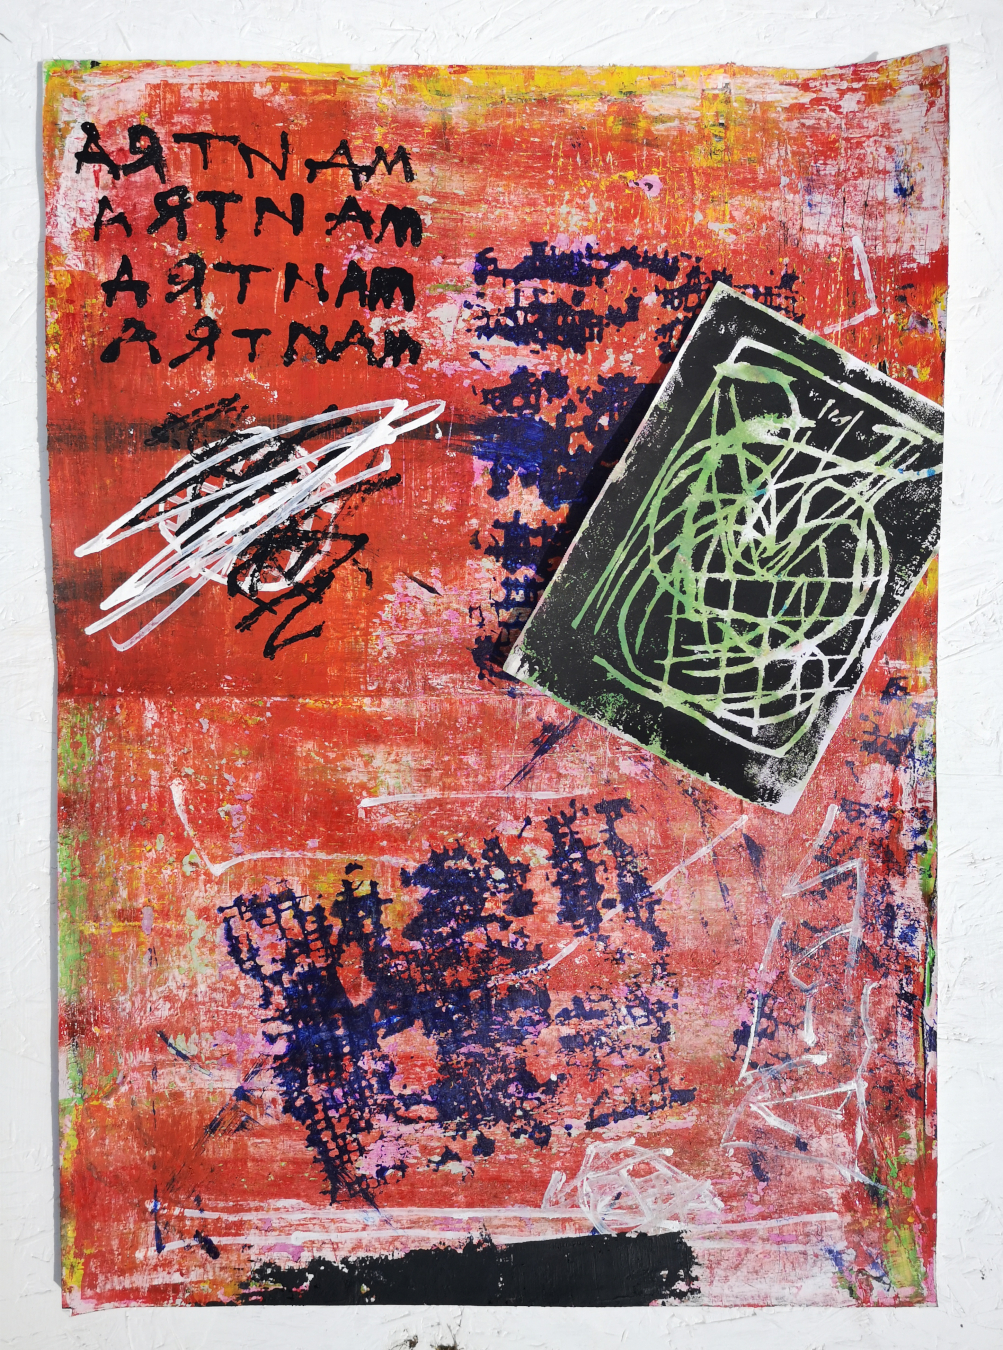 David Hicks // Acrylic, spray paint and industrial pen on paper with mono print work attached